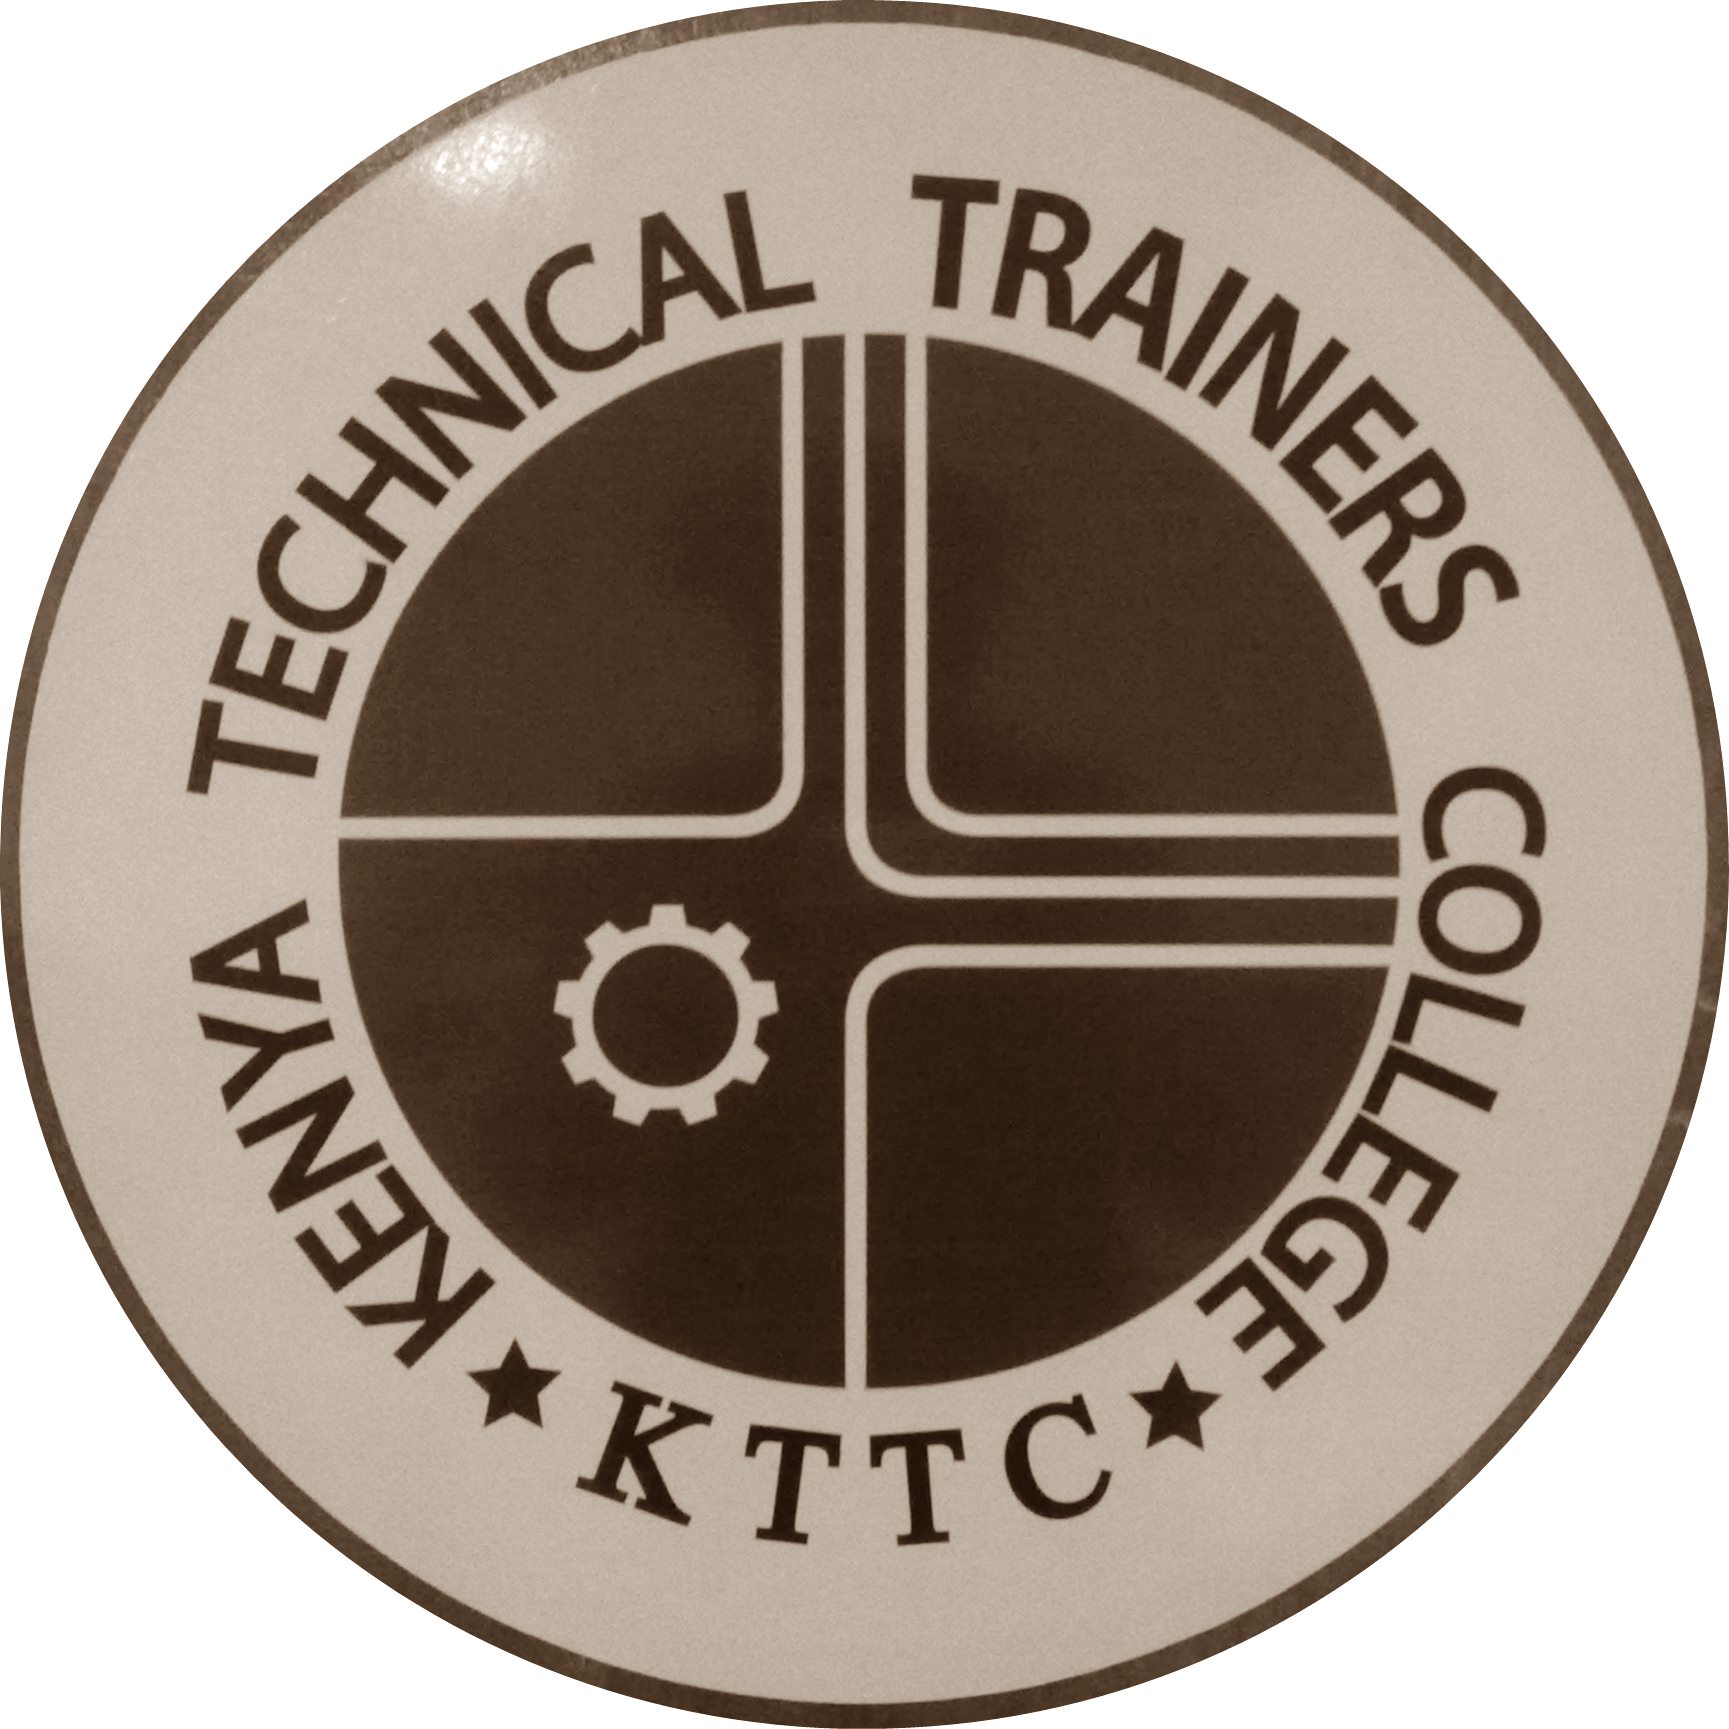 What are the Courses Offered at KTTC?